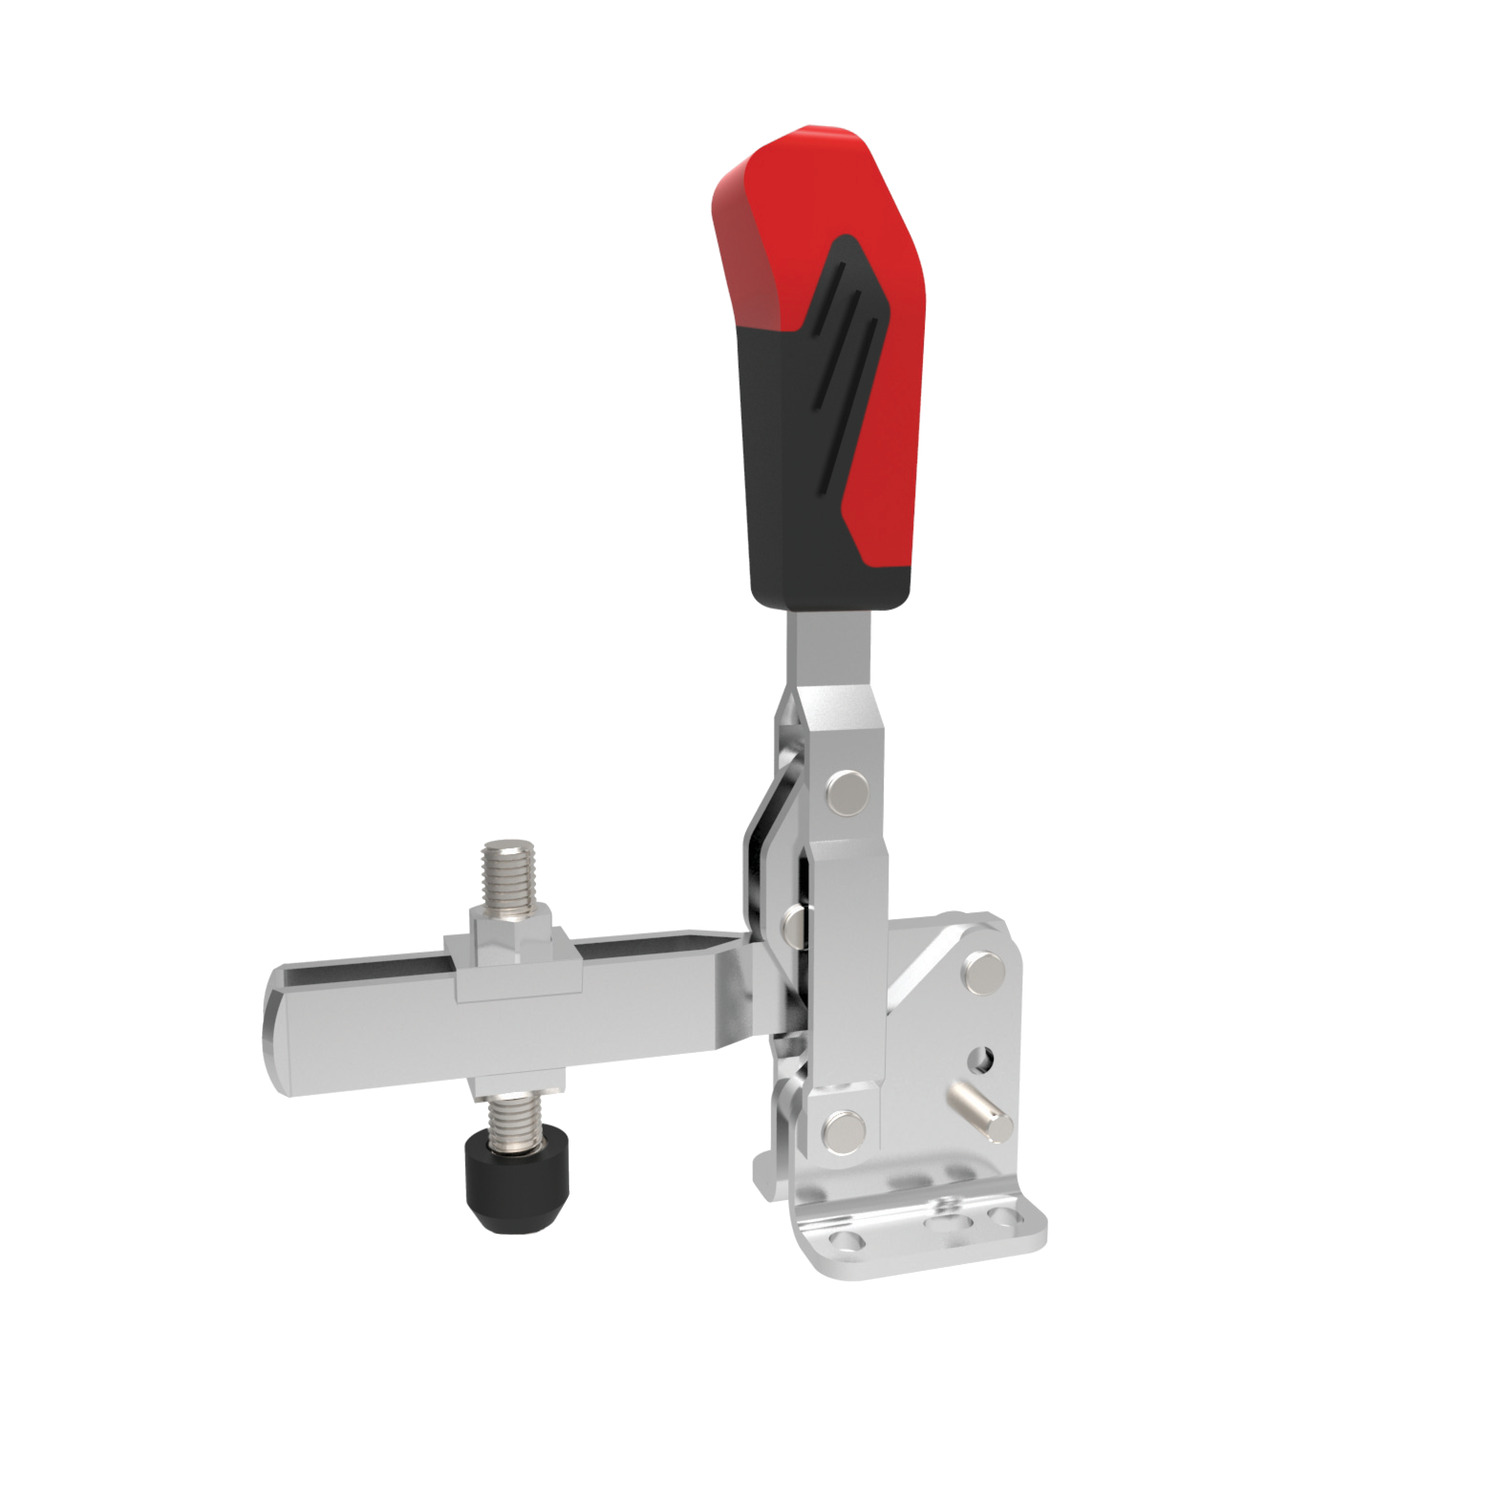 Product 40000.1, Vertical Acting Toggle Clamps open arm - horizontal base / 